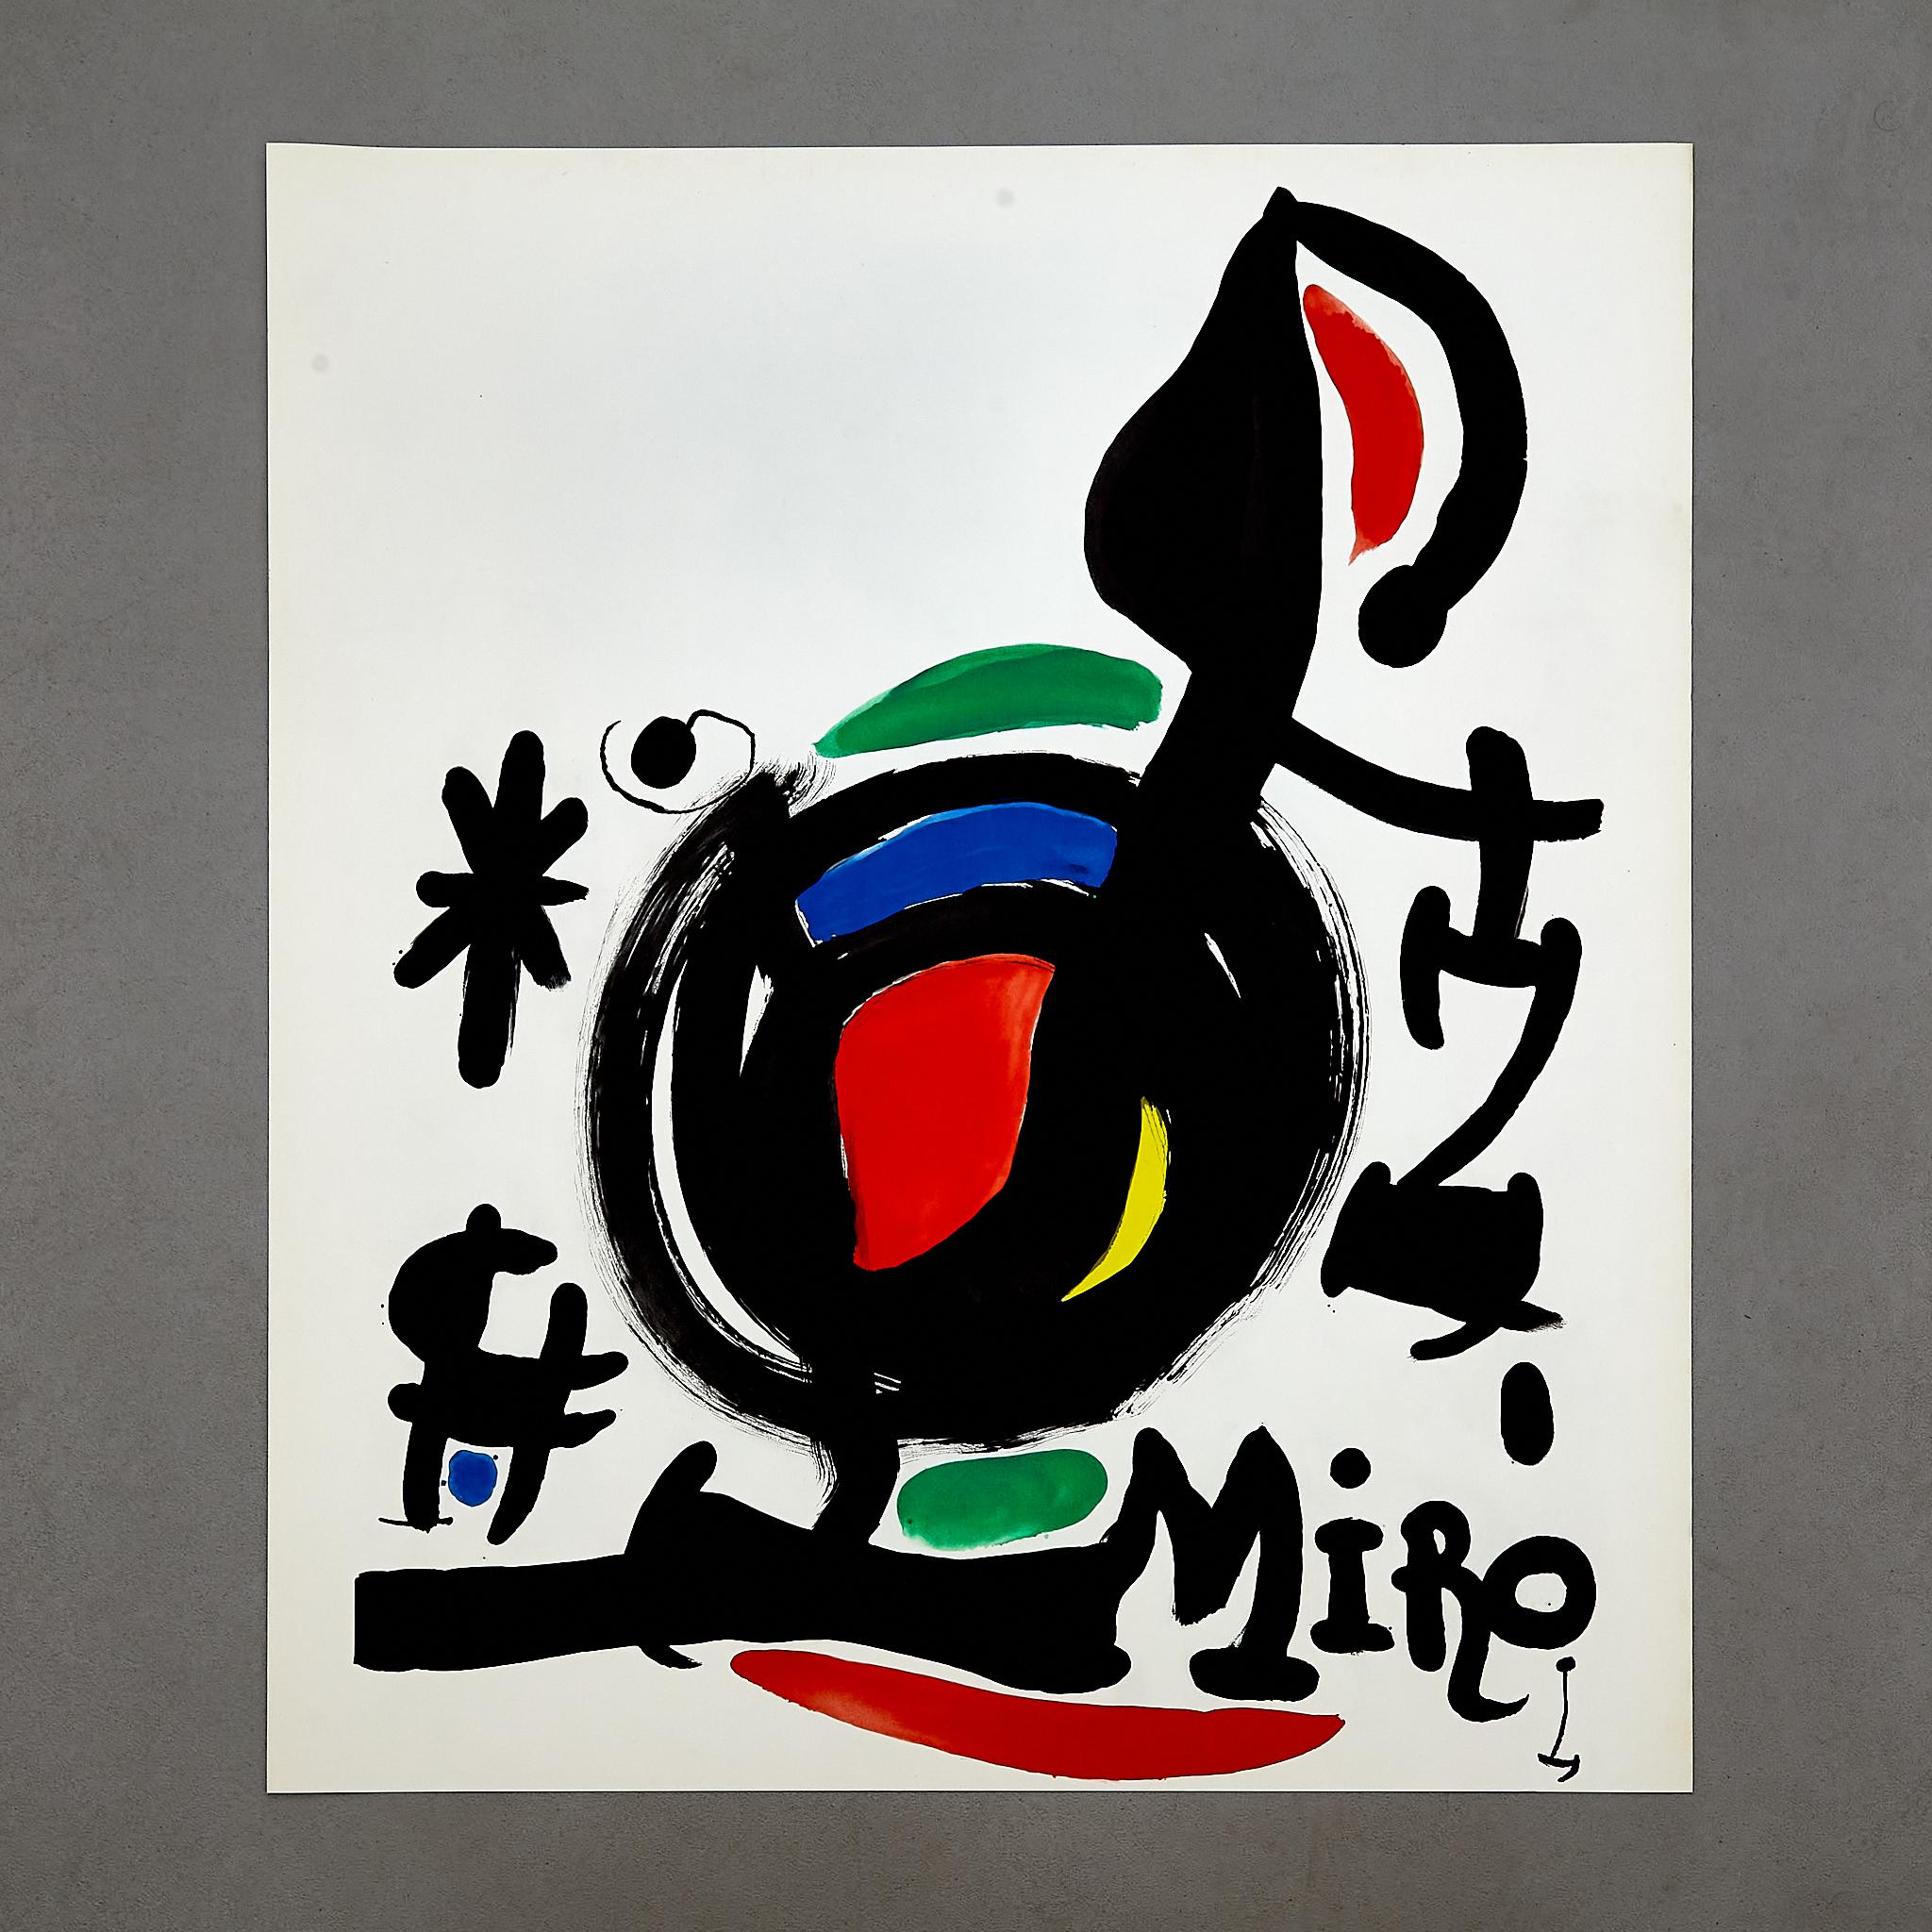 High Quality Fine Art Color Lithography by Joan Miró.

Manufactured in Spain, circa 1969.

In original condition with minor wear consistent of age and use, preserving a beautiful patina.

Signed on the stone

Materials: 
Paper 

Dimensions: 
D 0.1